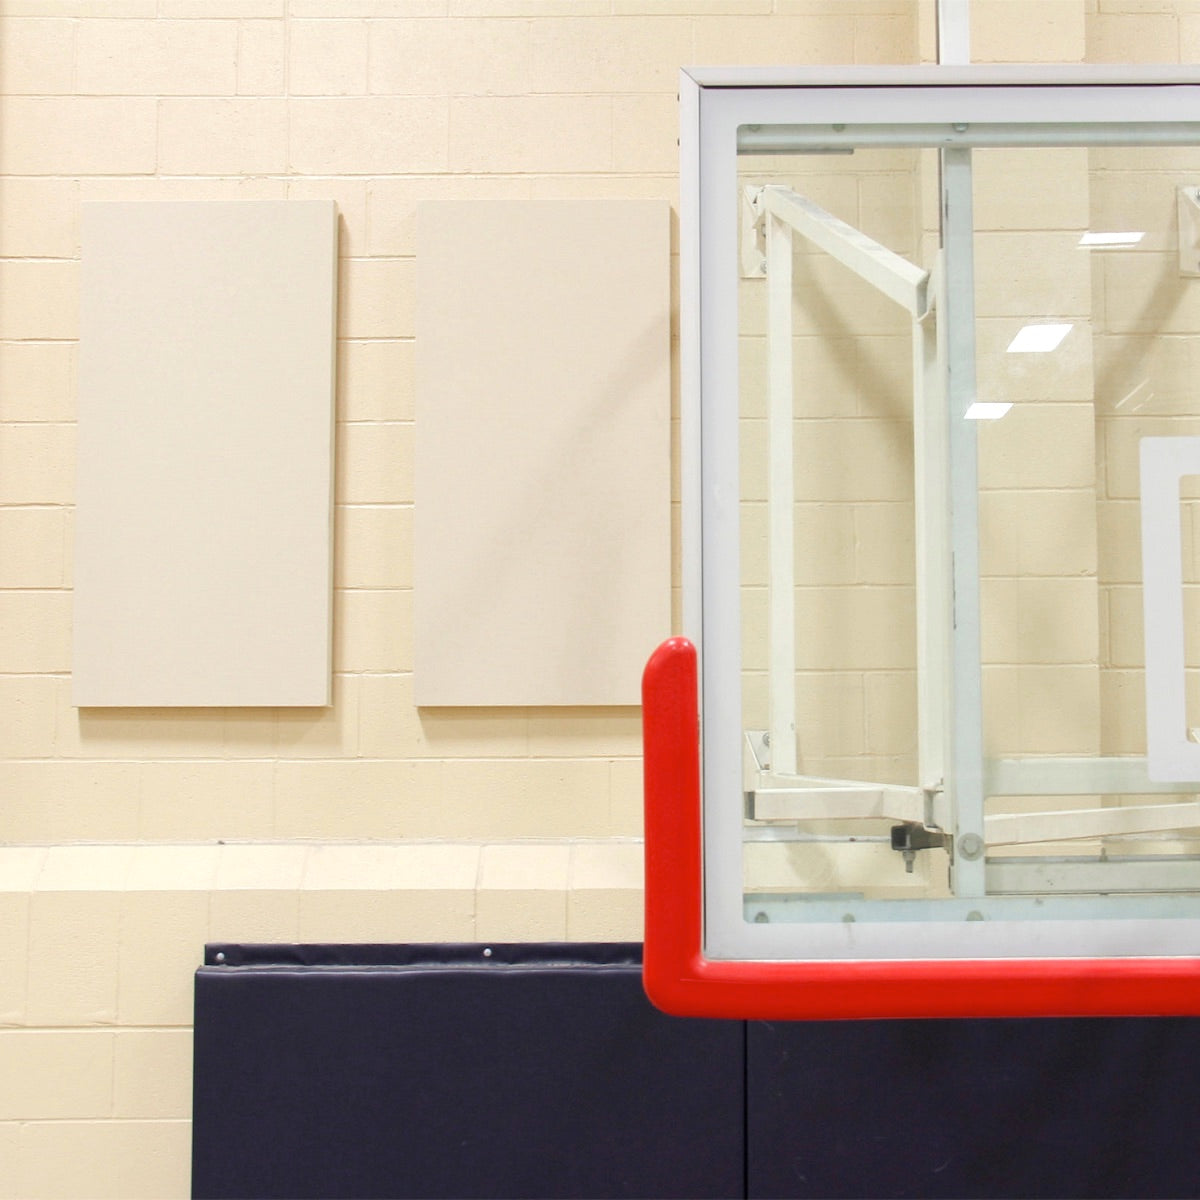 Primacoustic Hercules - Impact-Resistant Acoustic Panels, installed in a gymnasium